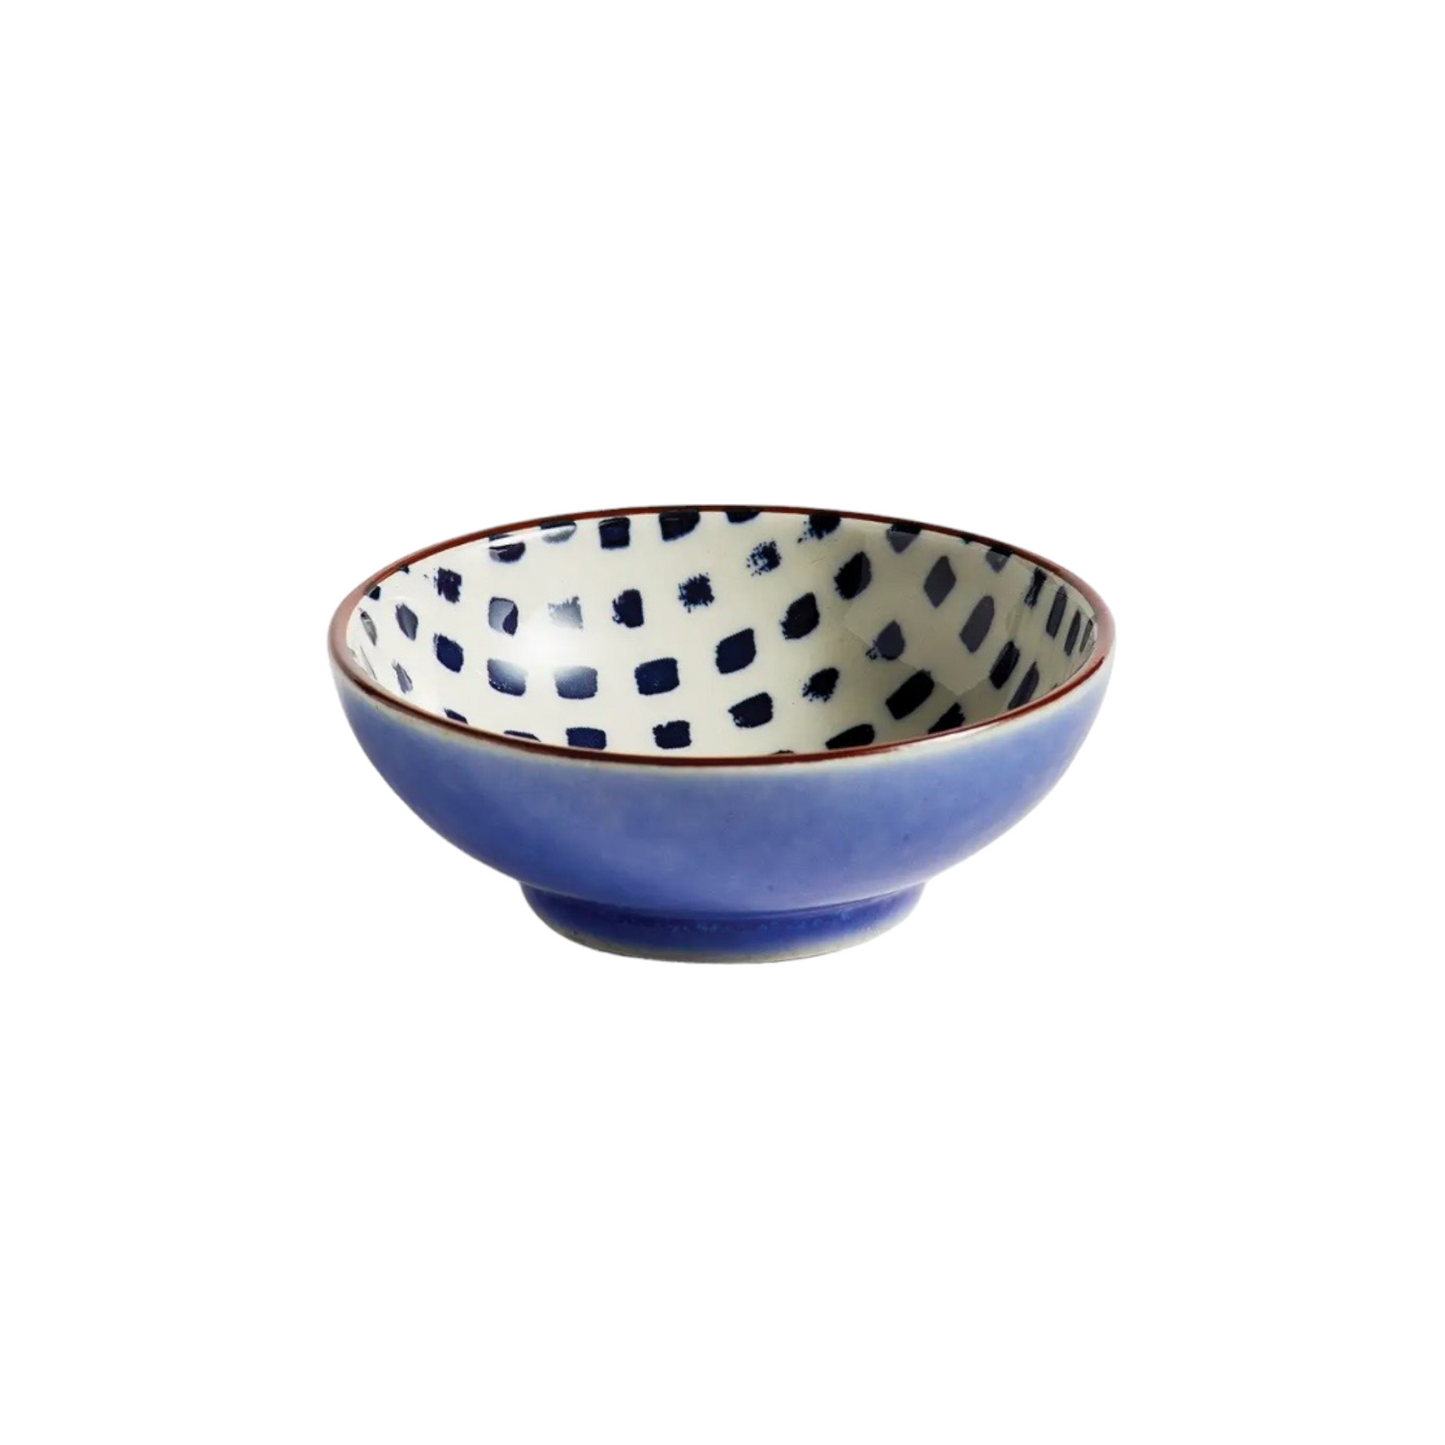 Little Dishes with Indigo accents